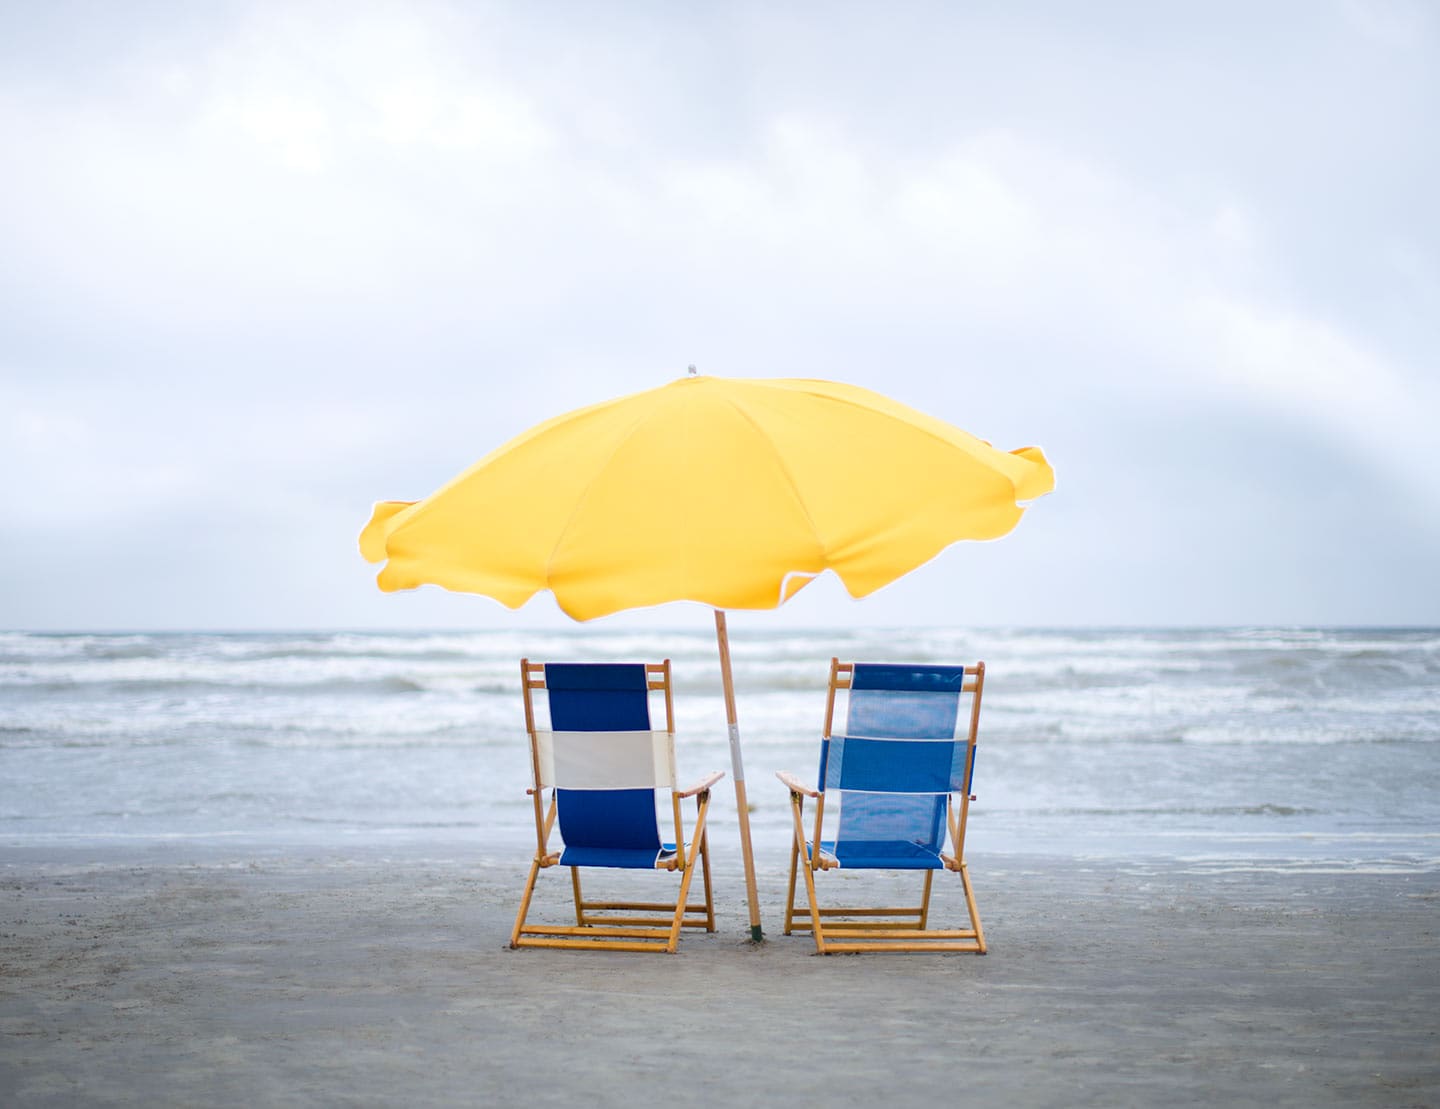 Two Blue Beach Chairs and a Yellow Sun Umbrella Facing Water Image Perspective Behind